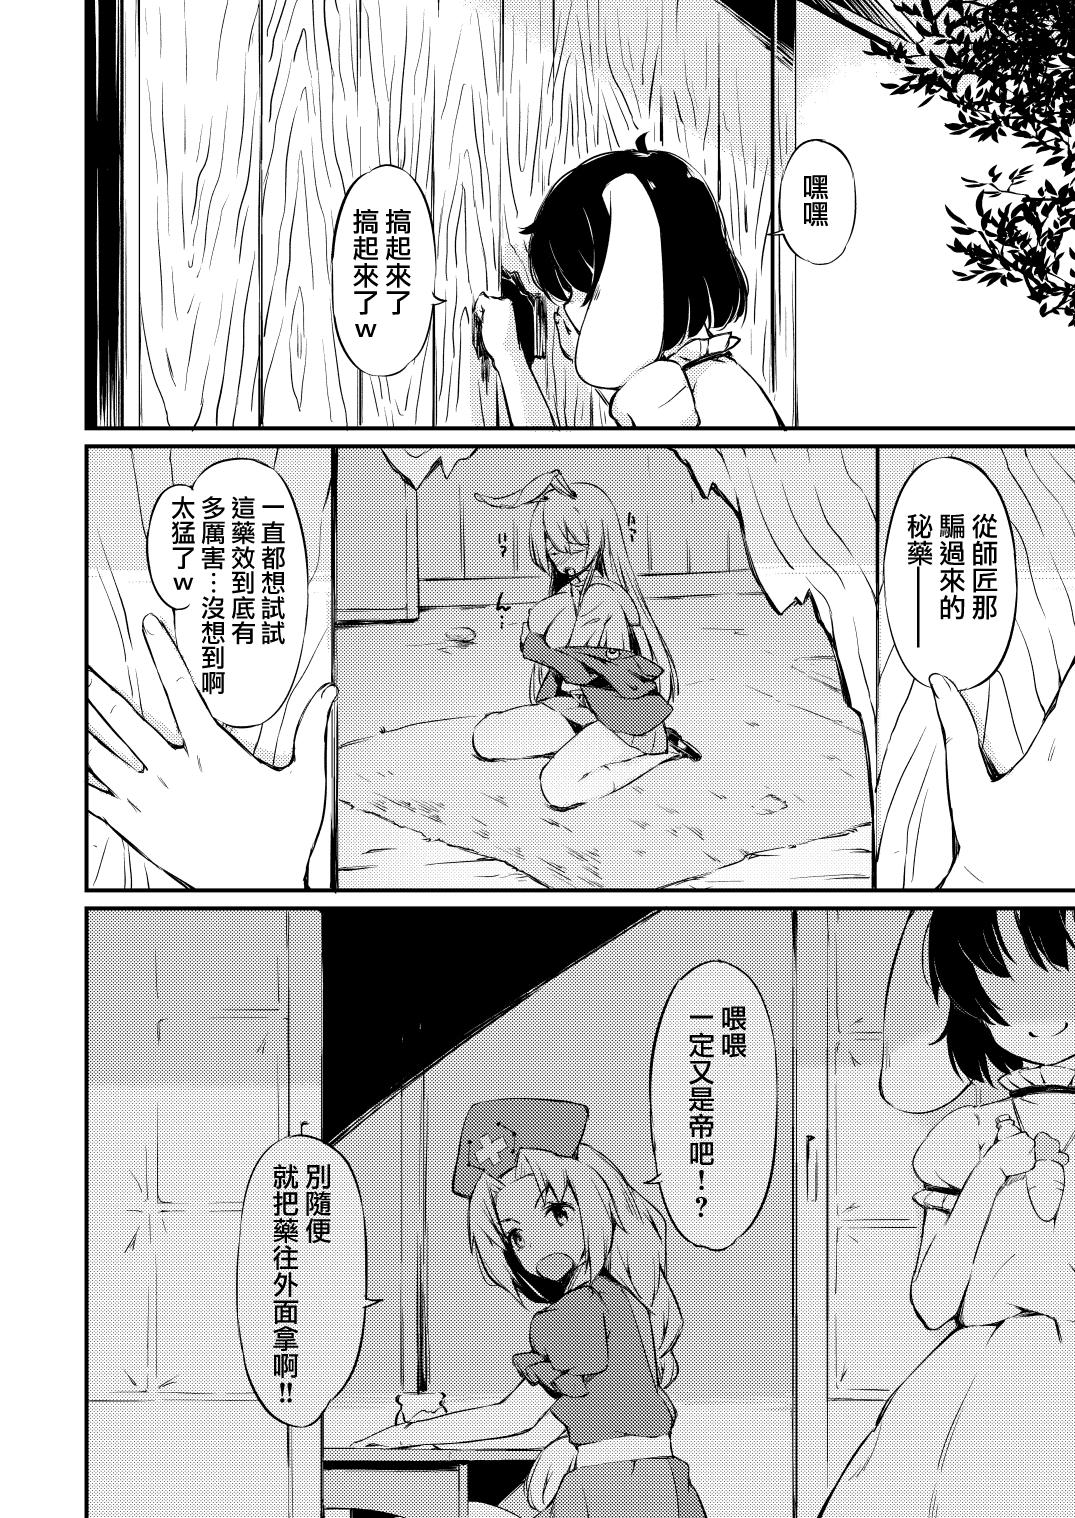 Russian Udon-chan Sei Ippai - Touhou project Horny - Page 5